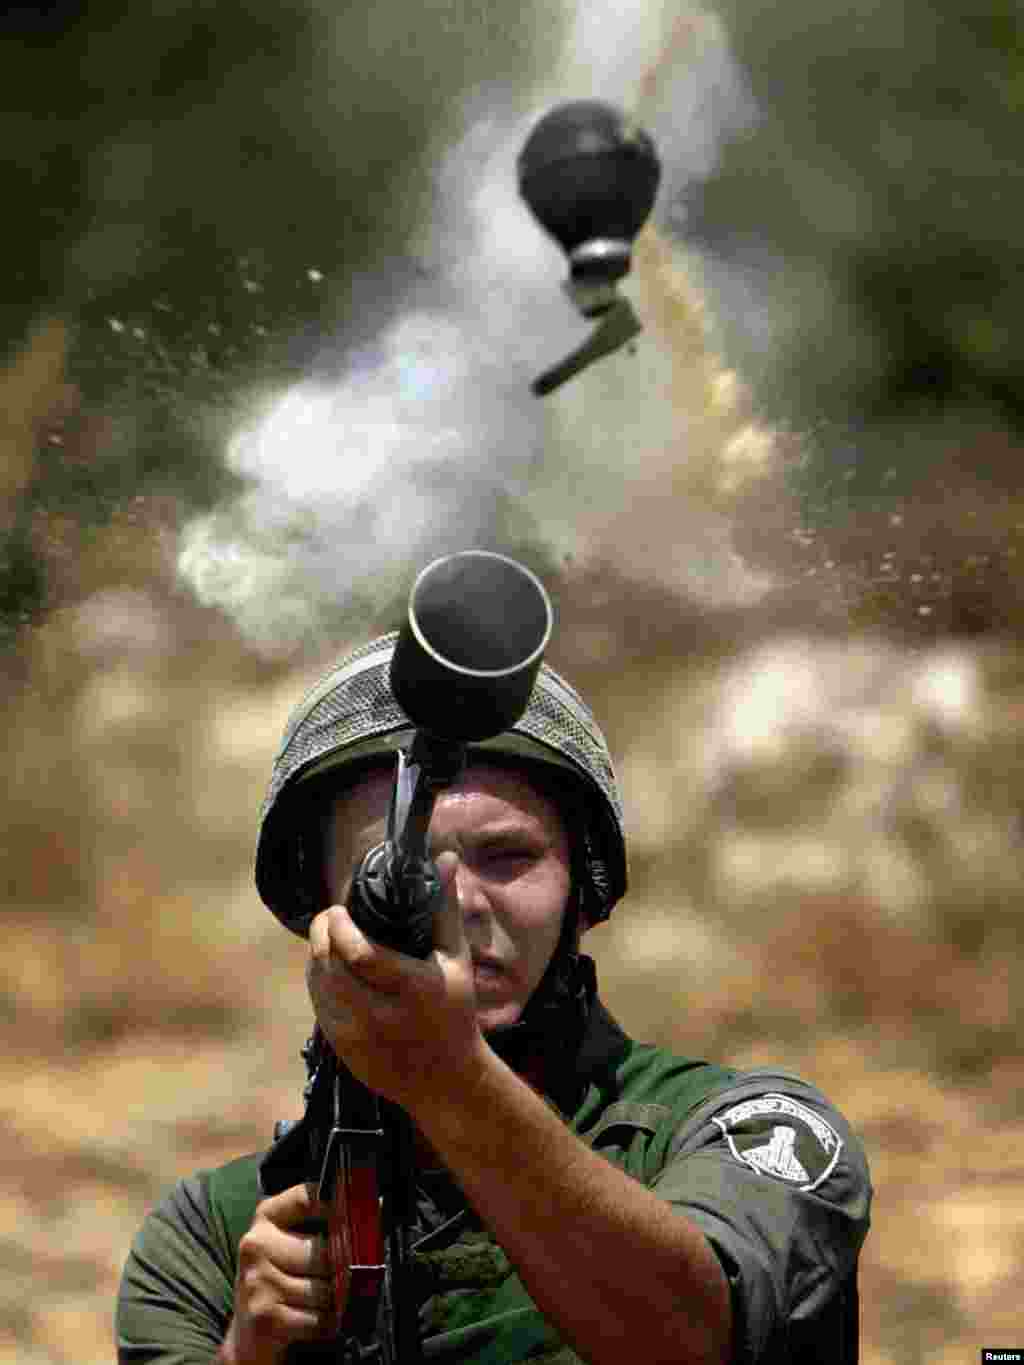 An Israeli border policeman fires teargas canister during a protest by Palestinians against the construction of the controversial Israeli security barrier in the West Bank village of Az-Zawiya June 20, 2004. REUTERS/Goran Tomasevic 